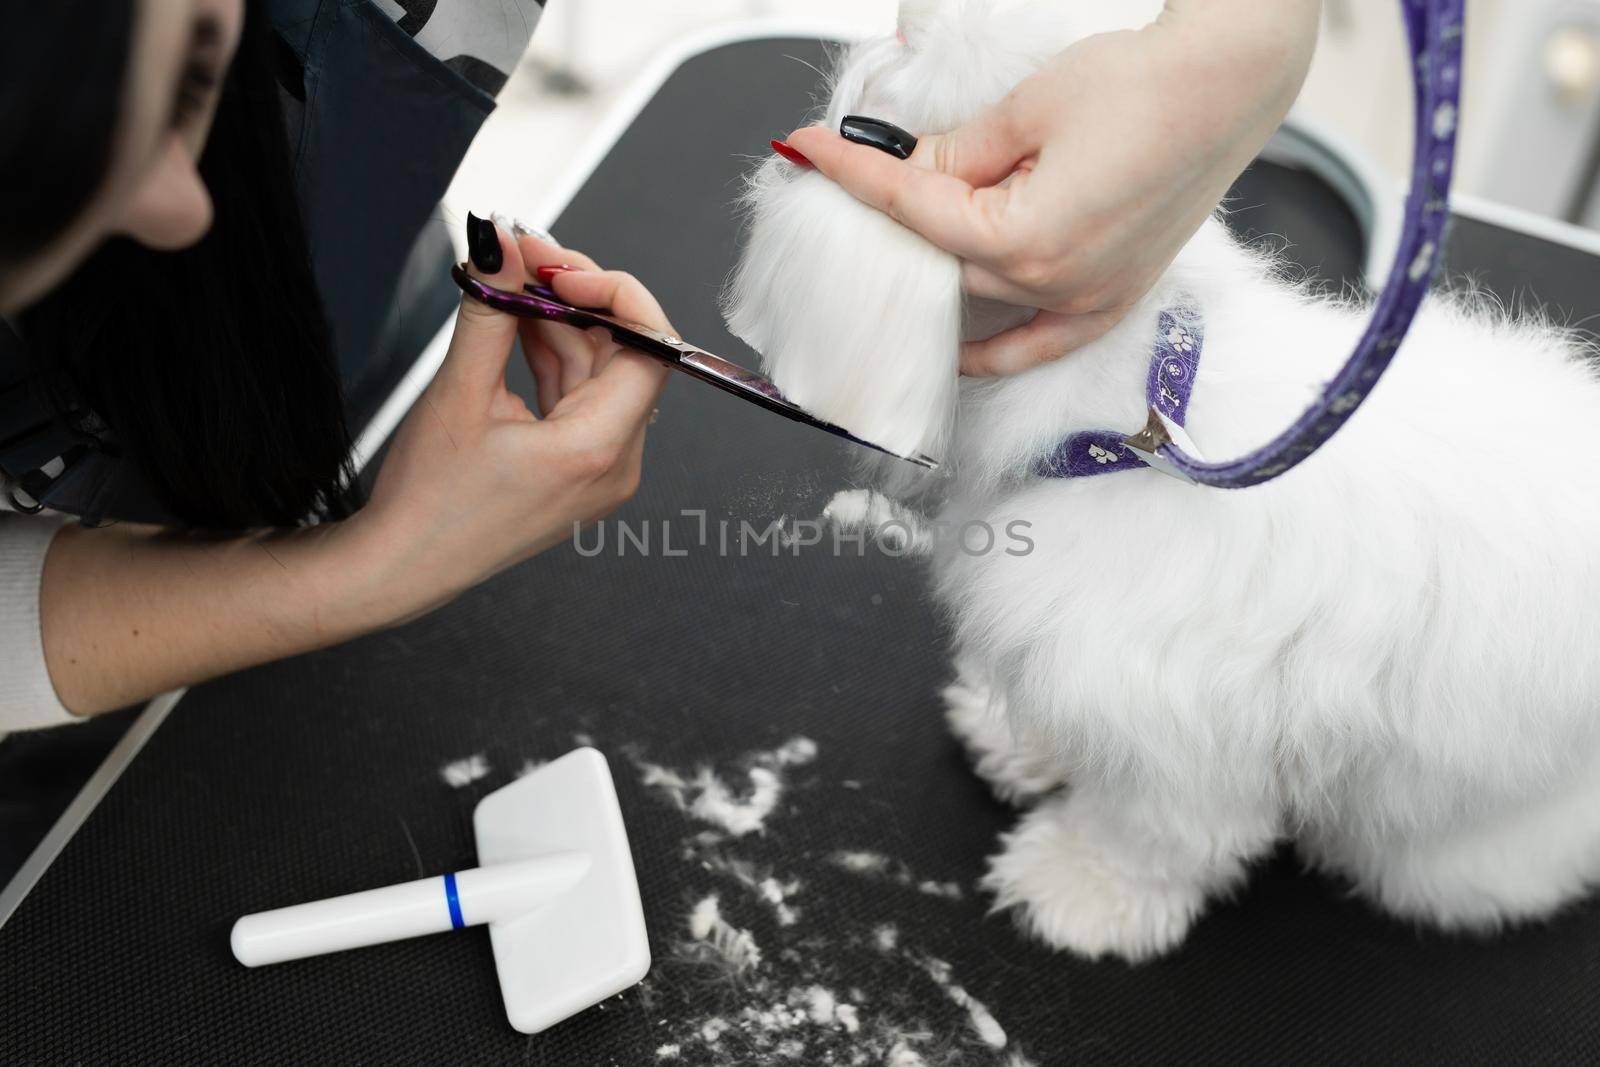 Female groomer haircut Bolonka Bolognese on the table for grooming in the beauty salon for dogs. Process of final shearing of a dog's hair with scissors by StudioPeace